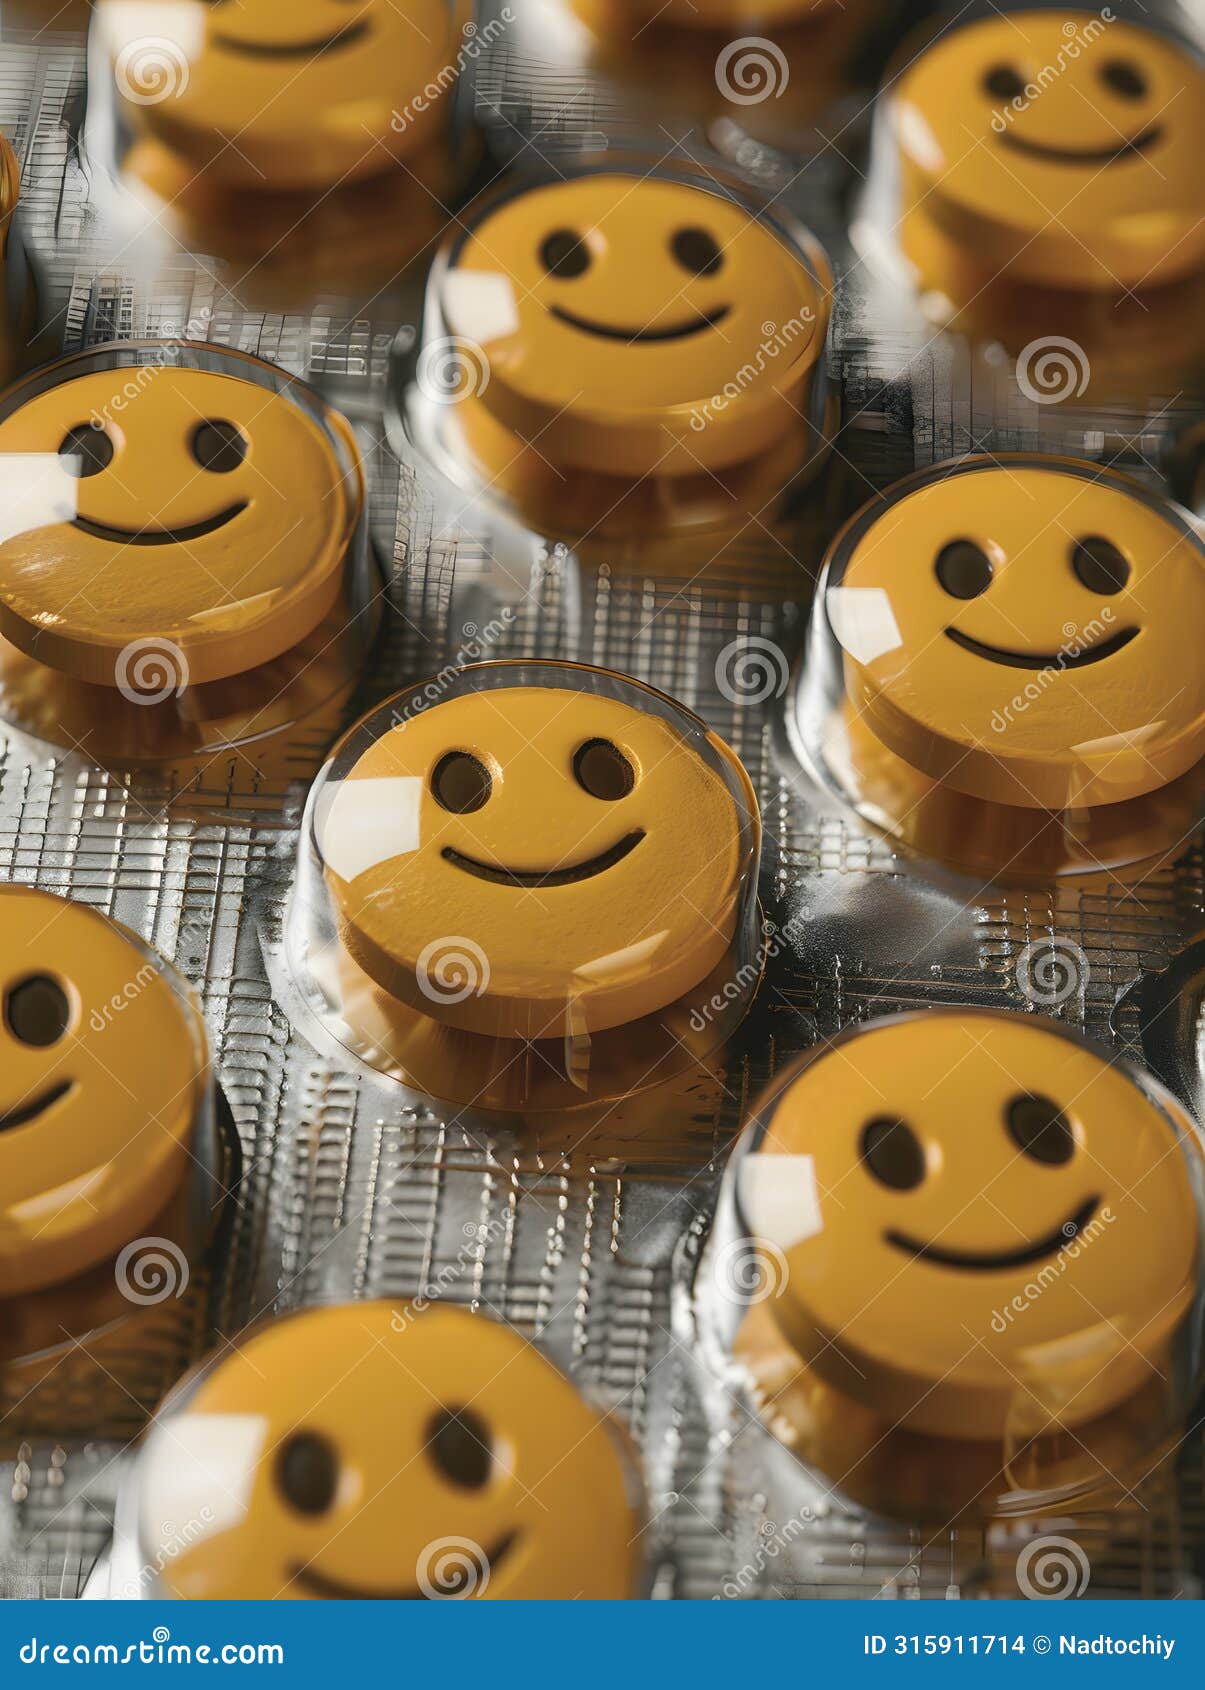 yellow smiley faces in plastic containers bring sweetness to baked goods